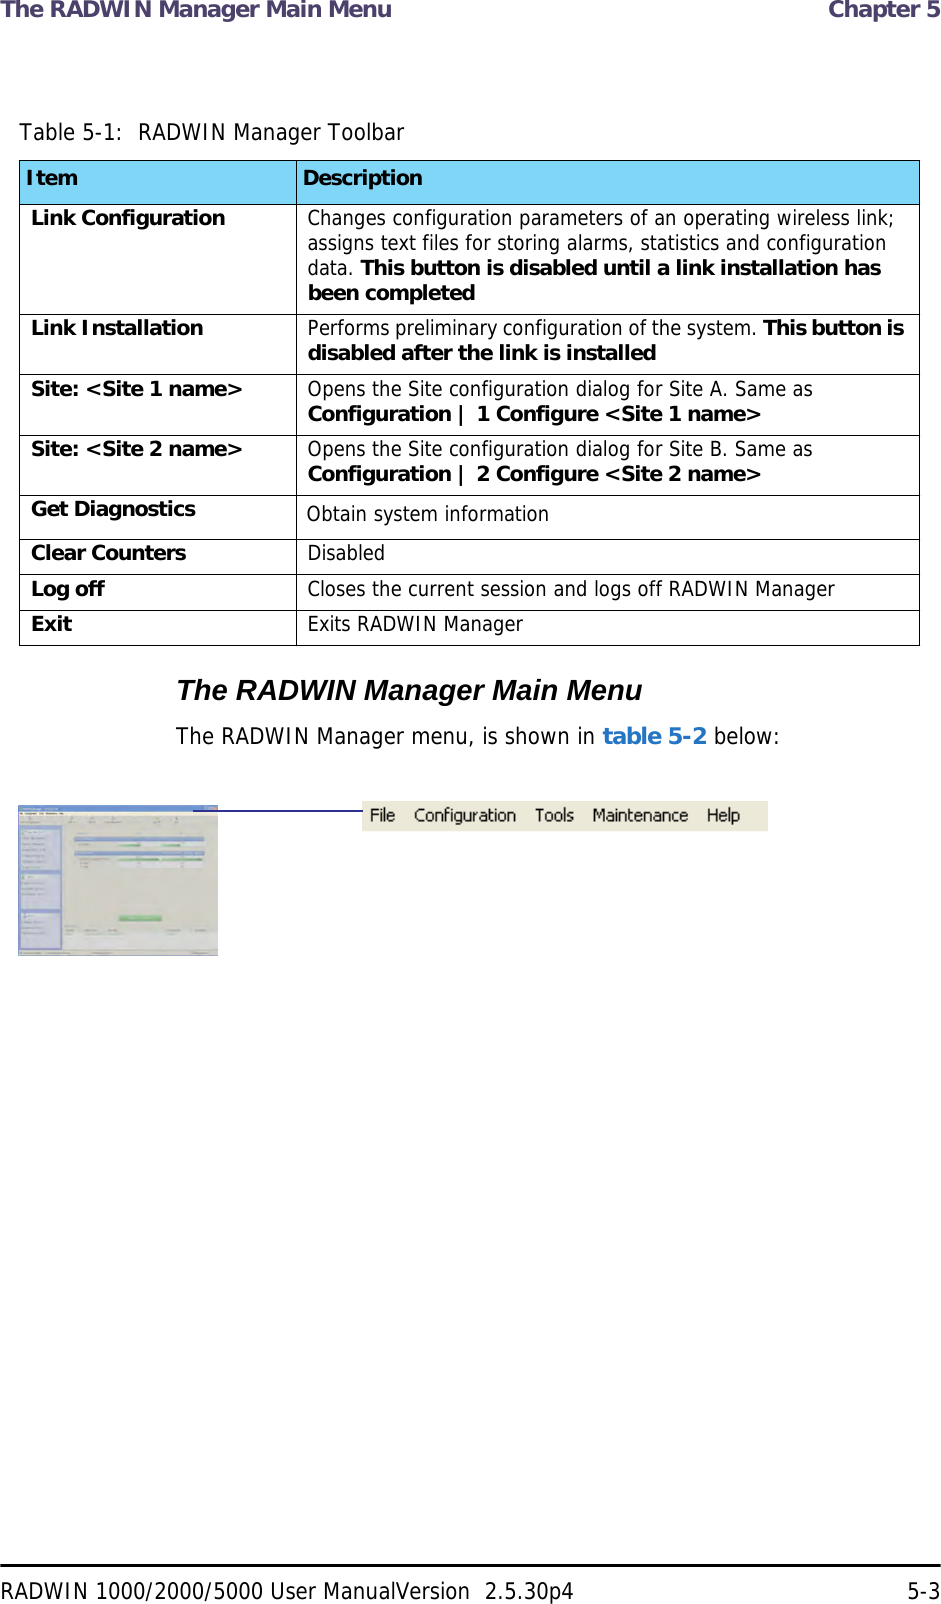 The RADWIN Manager Main Menu  Chapter 5RADWIN 1000/2000/5000 User ManualVersion  2.5.30p4 5-3The RADWIN Manager Main MenuThe RADWIN Manager menu, is shown in table 5-2 below:Table 5-1:  RADWIN Manager ToolbarItem DescriptionLink Configuration Changes configuration parameters of an operating wireless link; assigns text files for storing alarms, statistics and configuration data. This button is disabled until a link installation has been completedLink Installation Performs preliminary configuration of the system. This button is disabled after the link is installedSite: &lt;Site 1 name&gt; Opens the Site configuration dialog for Site A. Same as Configuration | 1 Configure &lt;Site 1 name&gt;Site: &lt;Site 2 name&gt; Opens the Site configuration dialog for Site B. Same as Configuration | 2 Configure &lt;Site 2 name&gt;Get Diagnostics Obtain system informationClear Counters DisabledLog off Closes the current session and logs off RADWIN ManagerExit Exits RADWIN Manager